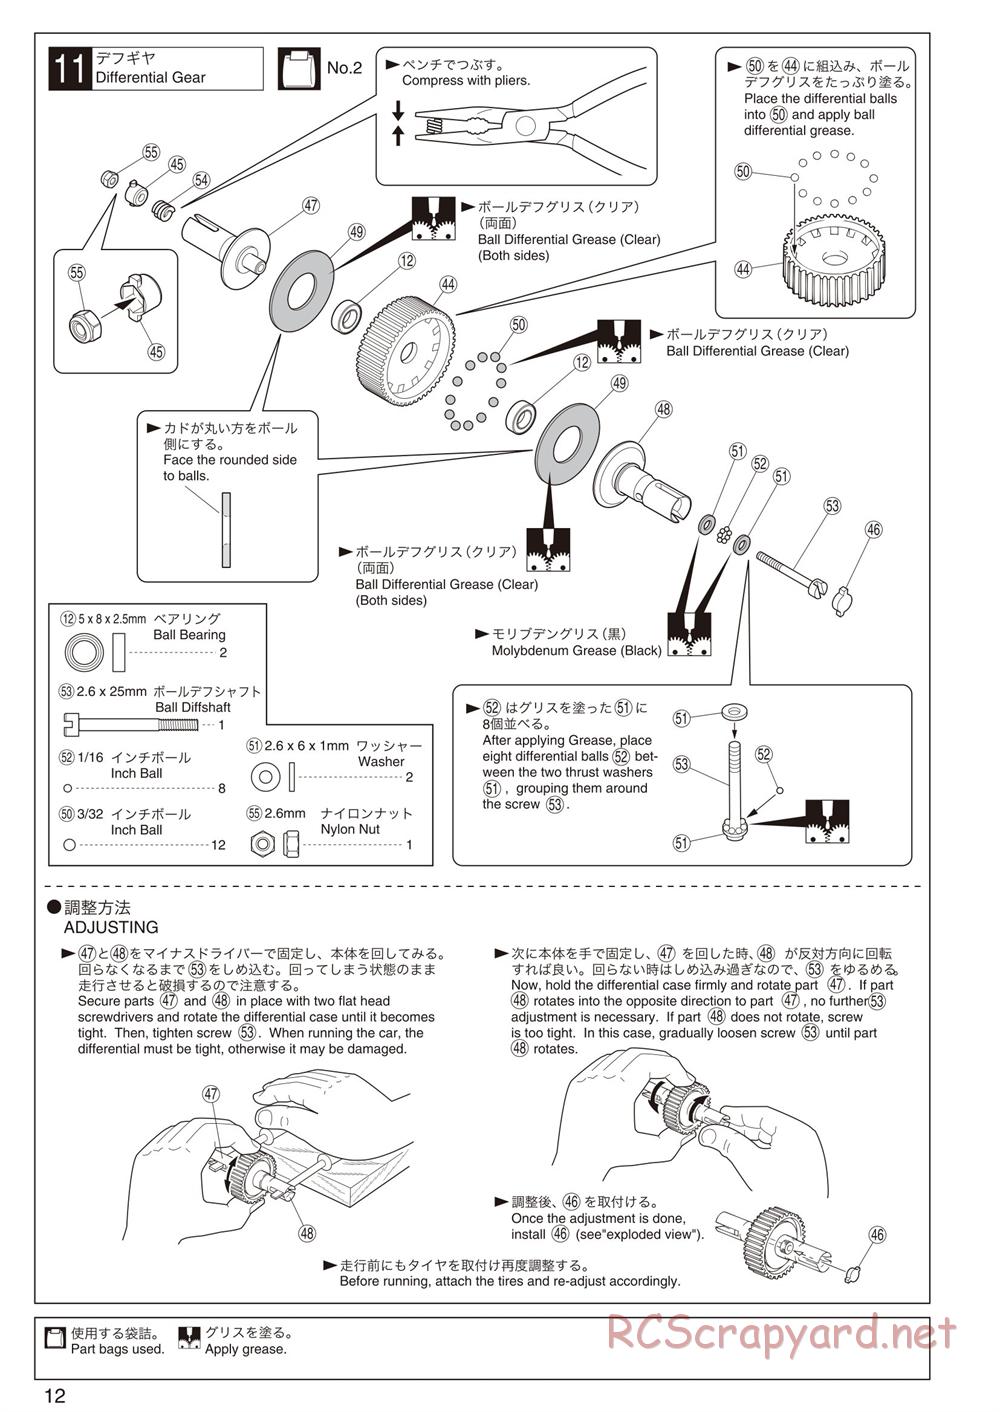 Kyosho - Ultima RB5 SP - Manual - Page 12